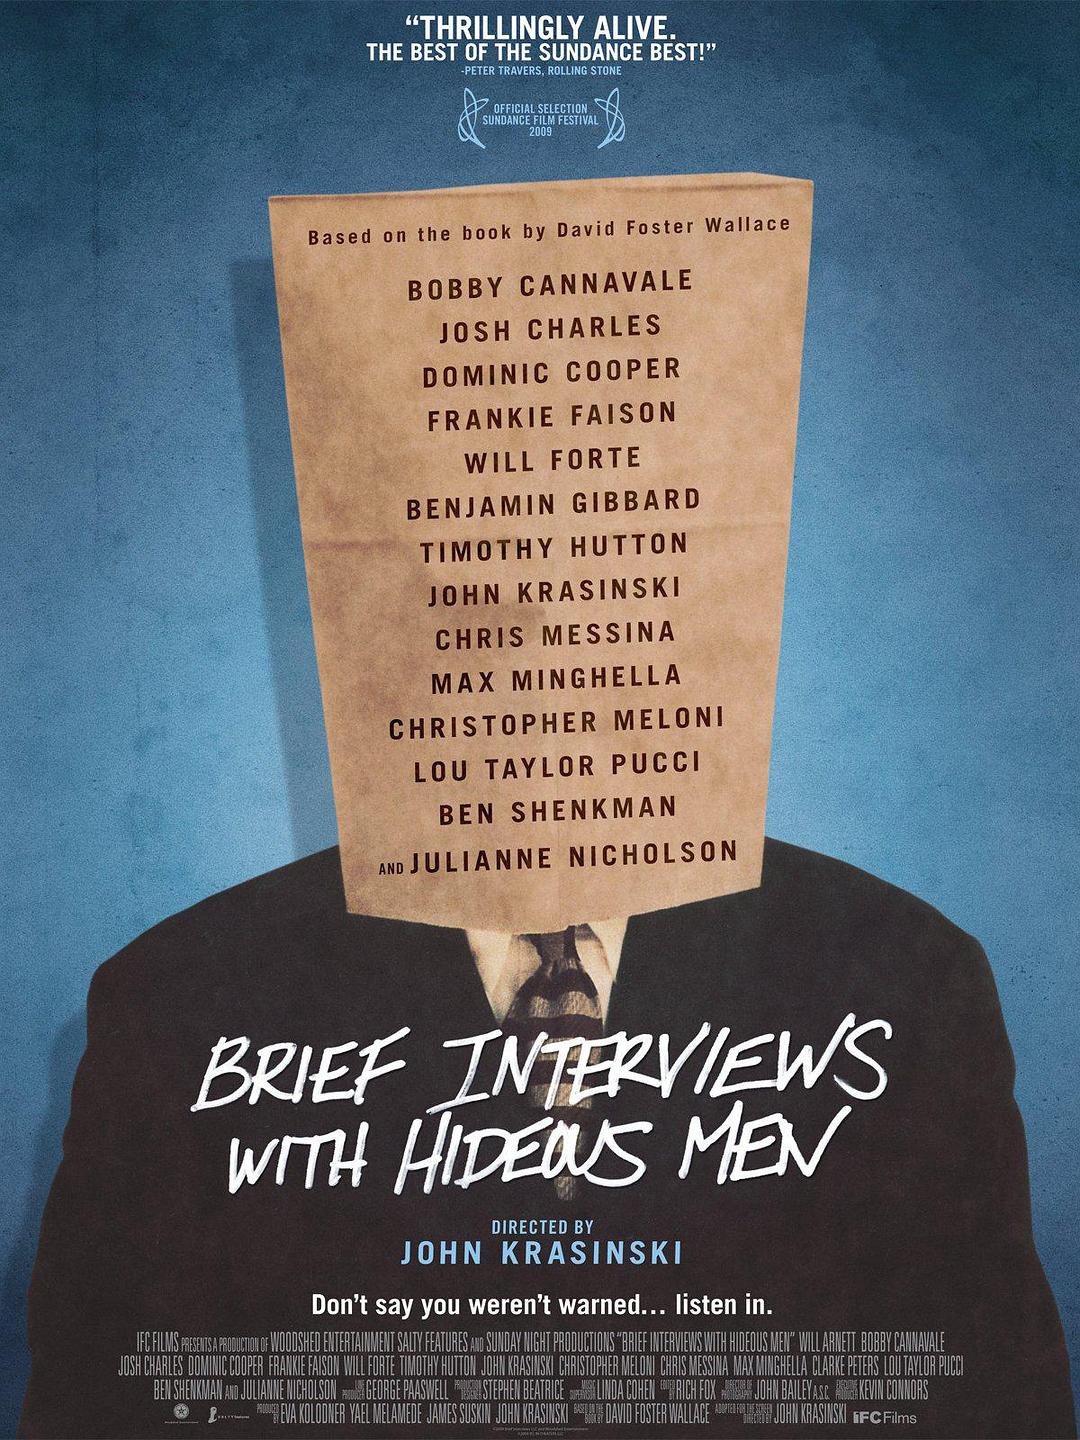  Brief.Interviews.With.Hideous.Men.2009.1080p.BluRay.x264.DTS-FGT 6.34GB-1.png